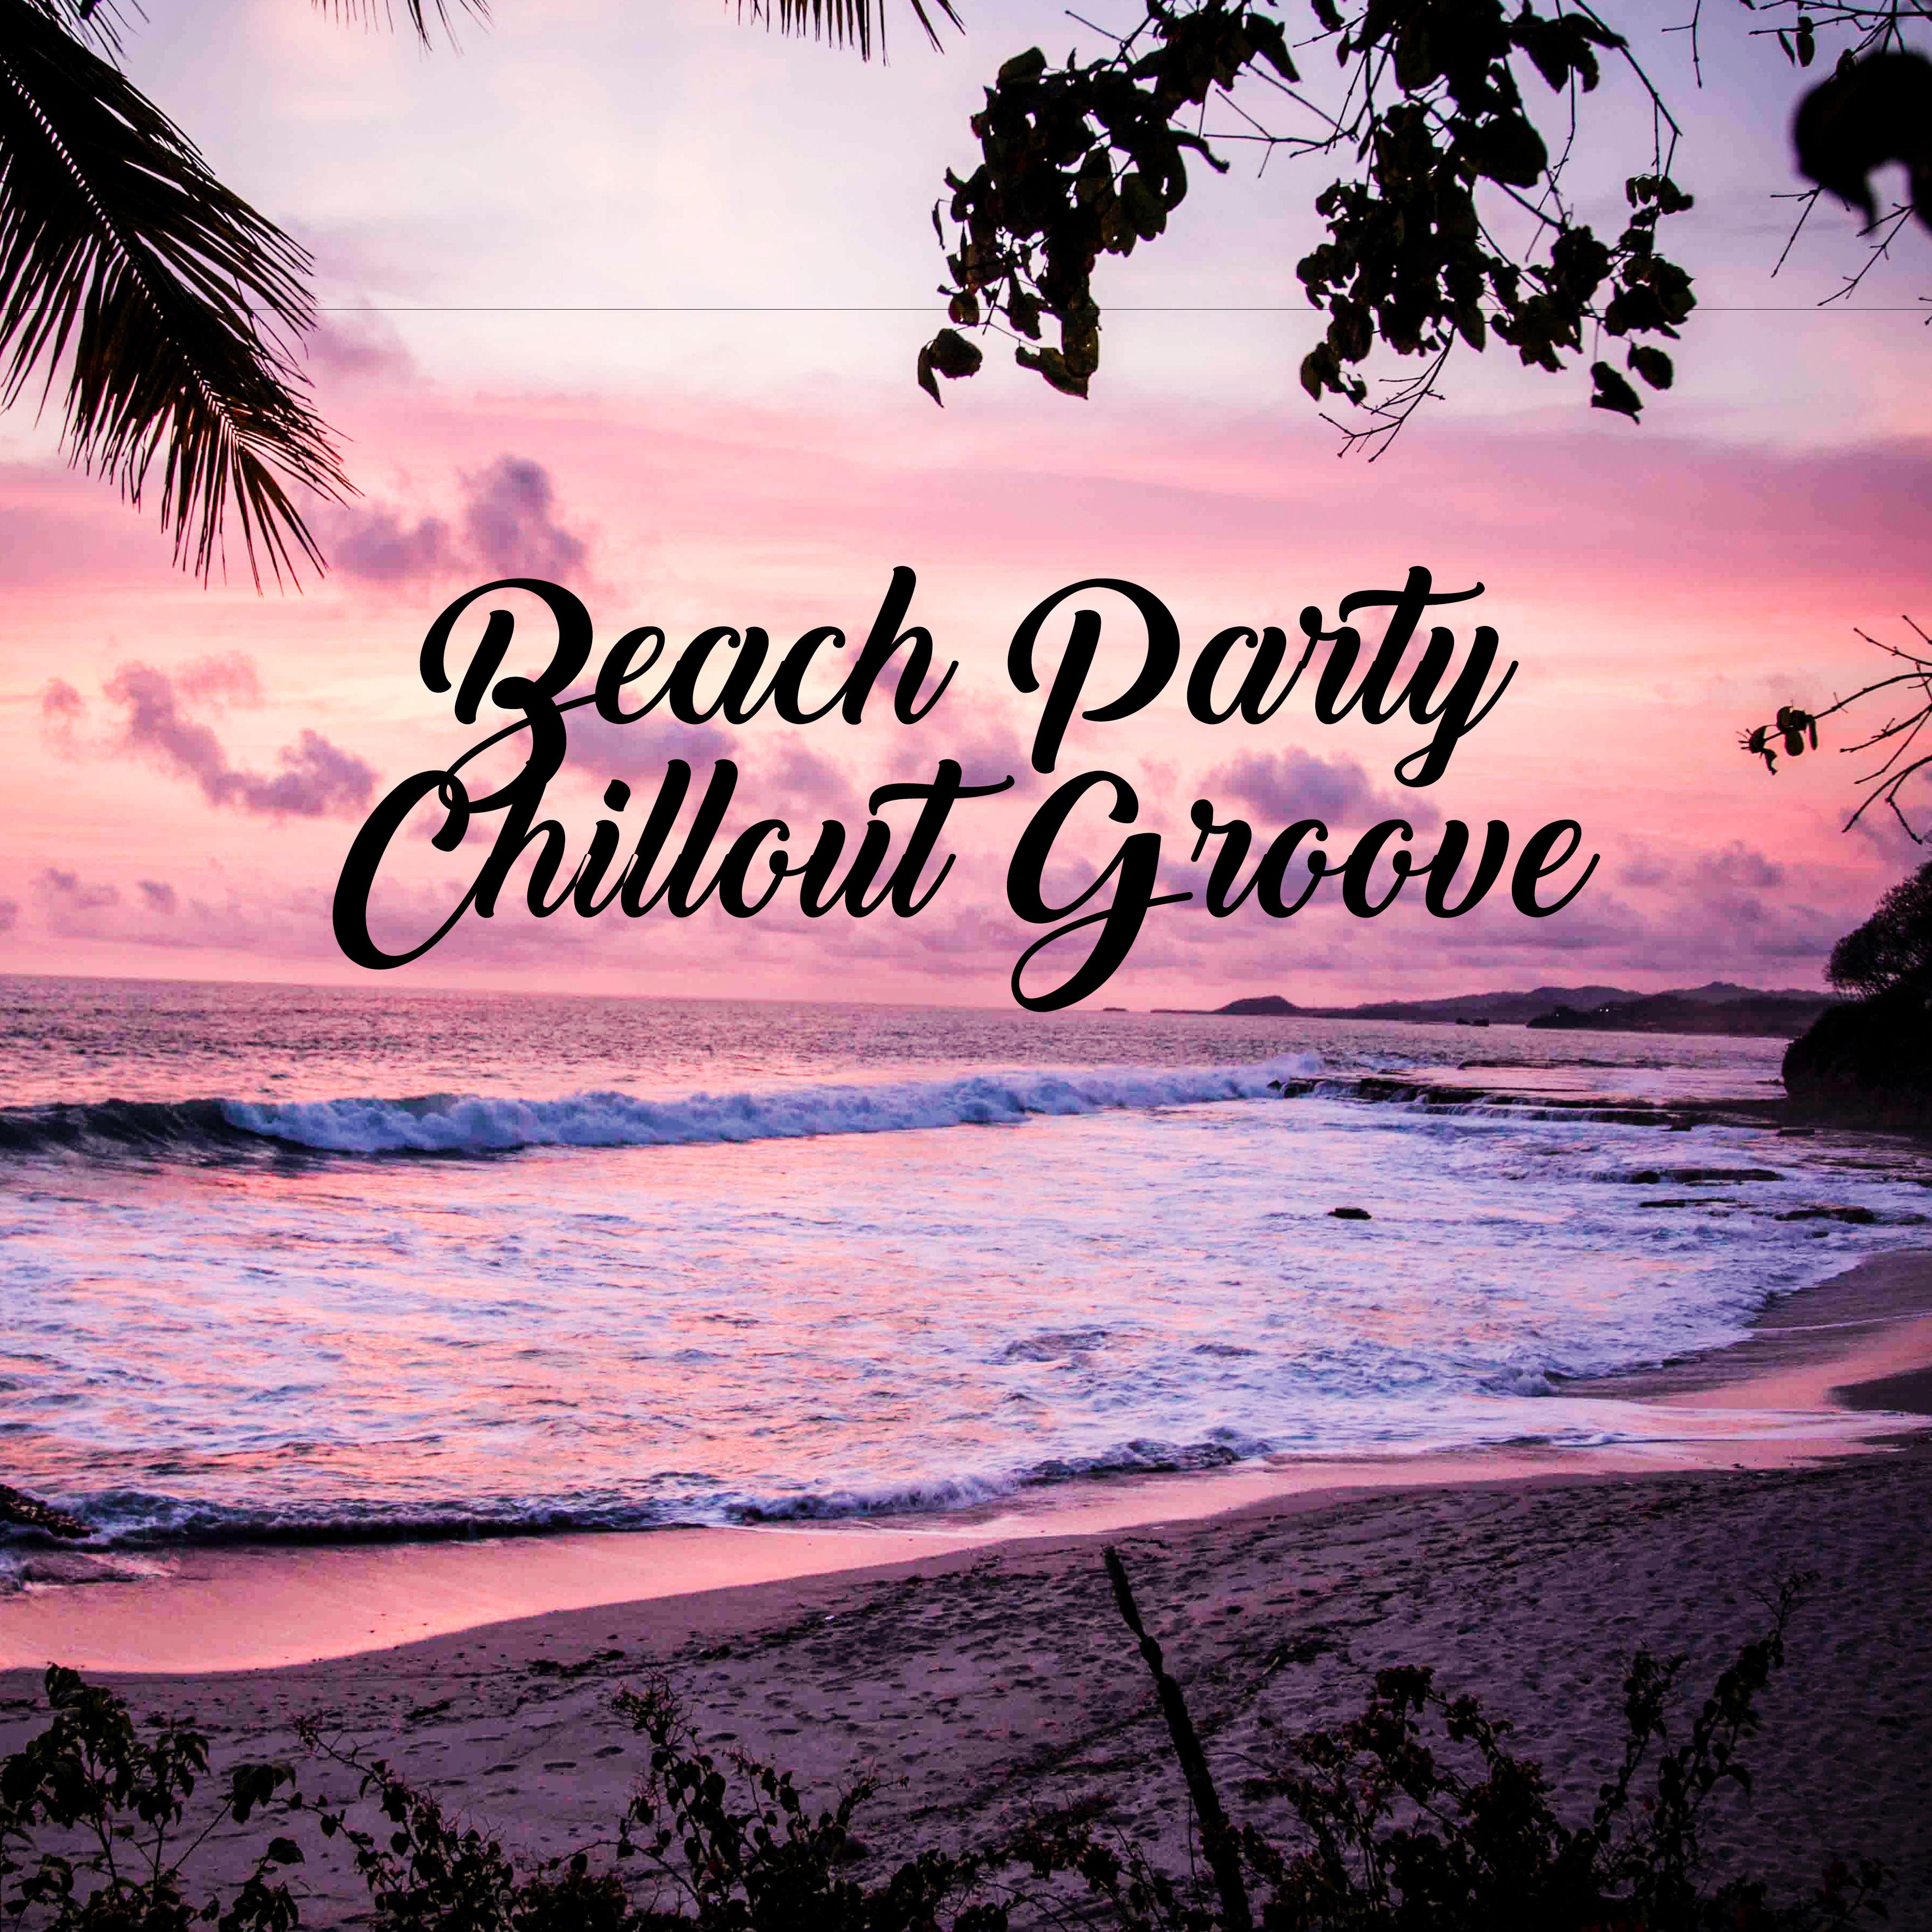 Beach Party Chillout Groove